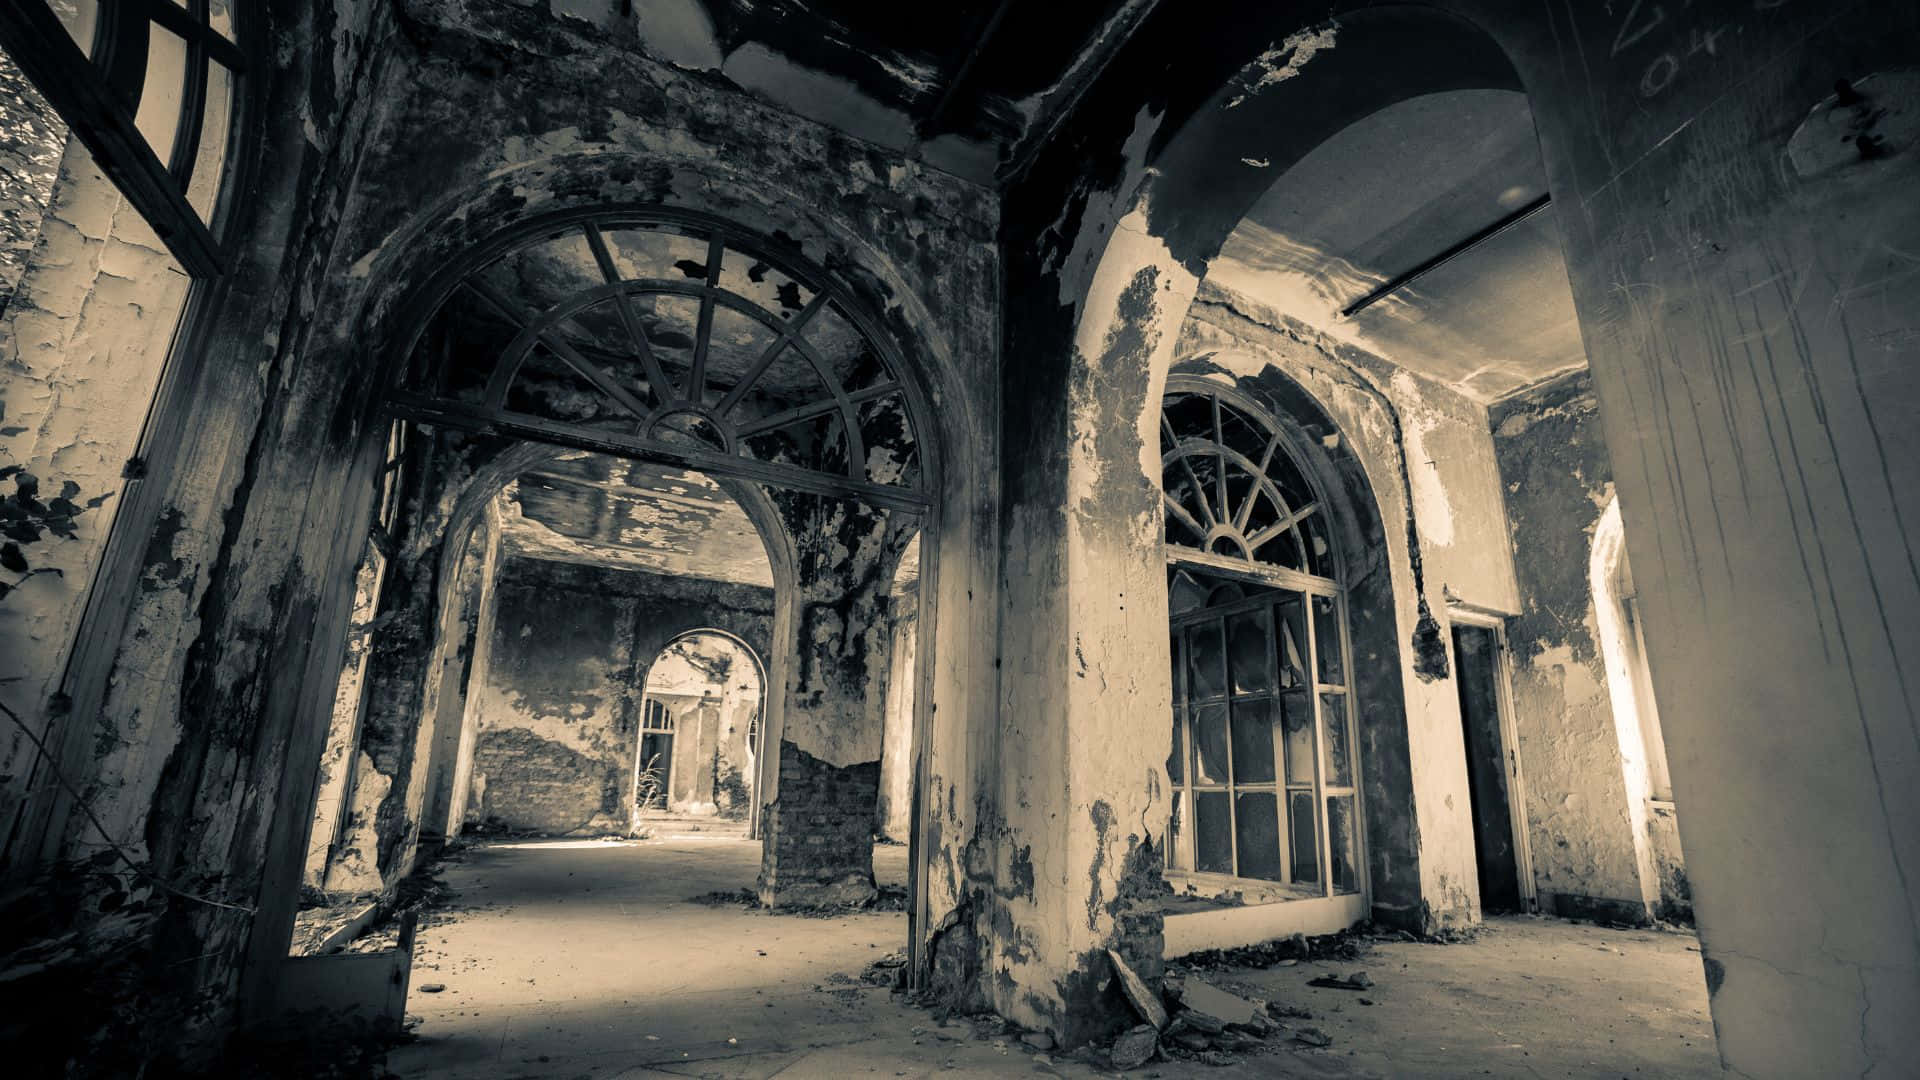 If You Dare, Step Inside These Haunted Hotels" Wallpaper